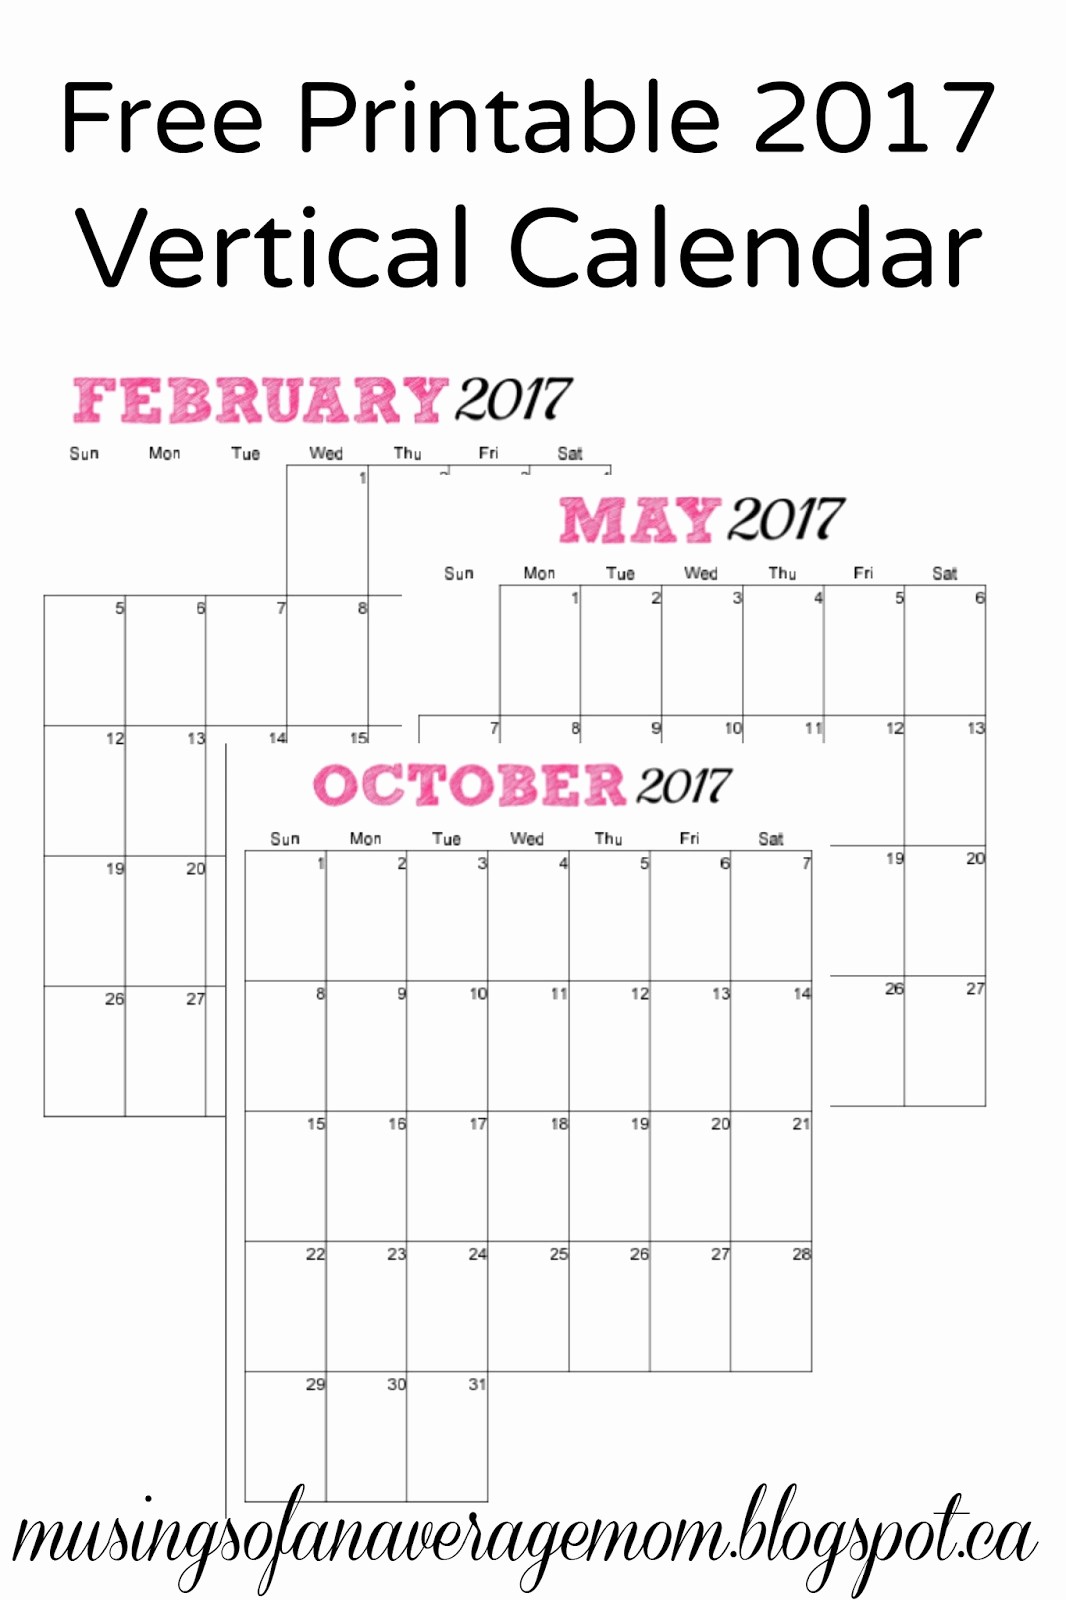 2017 Monthly Calendar Free Printable New Musings Of An Average Mom Free 2017 Vertical Monthly Calendar